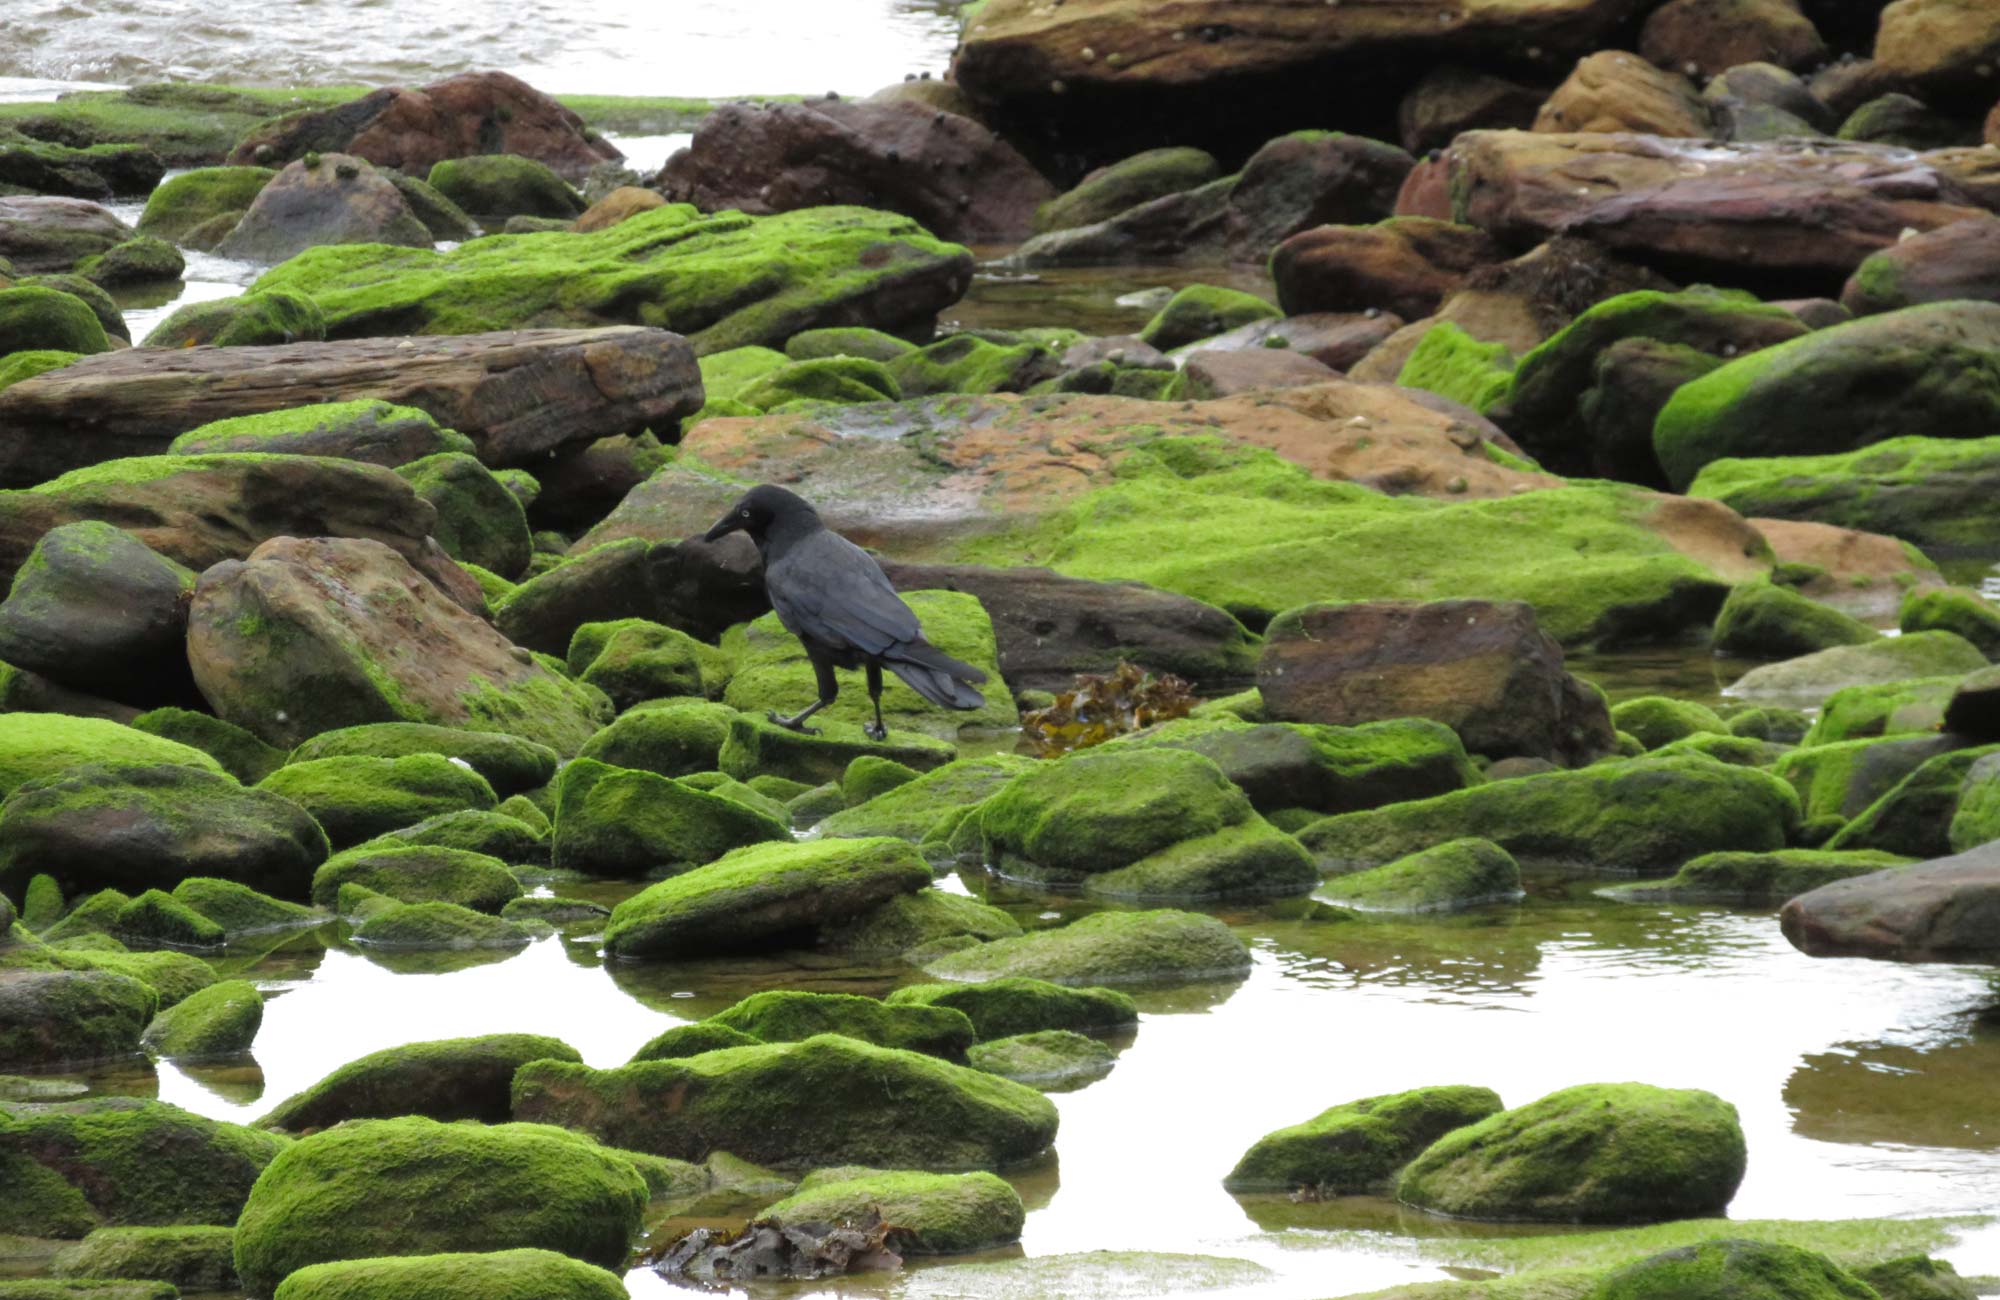 Bird on the rocks in Curracurrang in Royal National Park. Photo: K Cooper/OEH